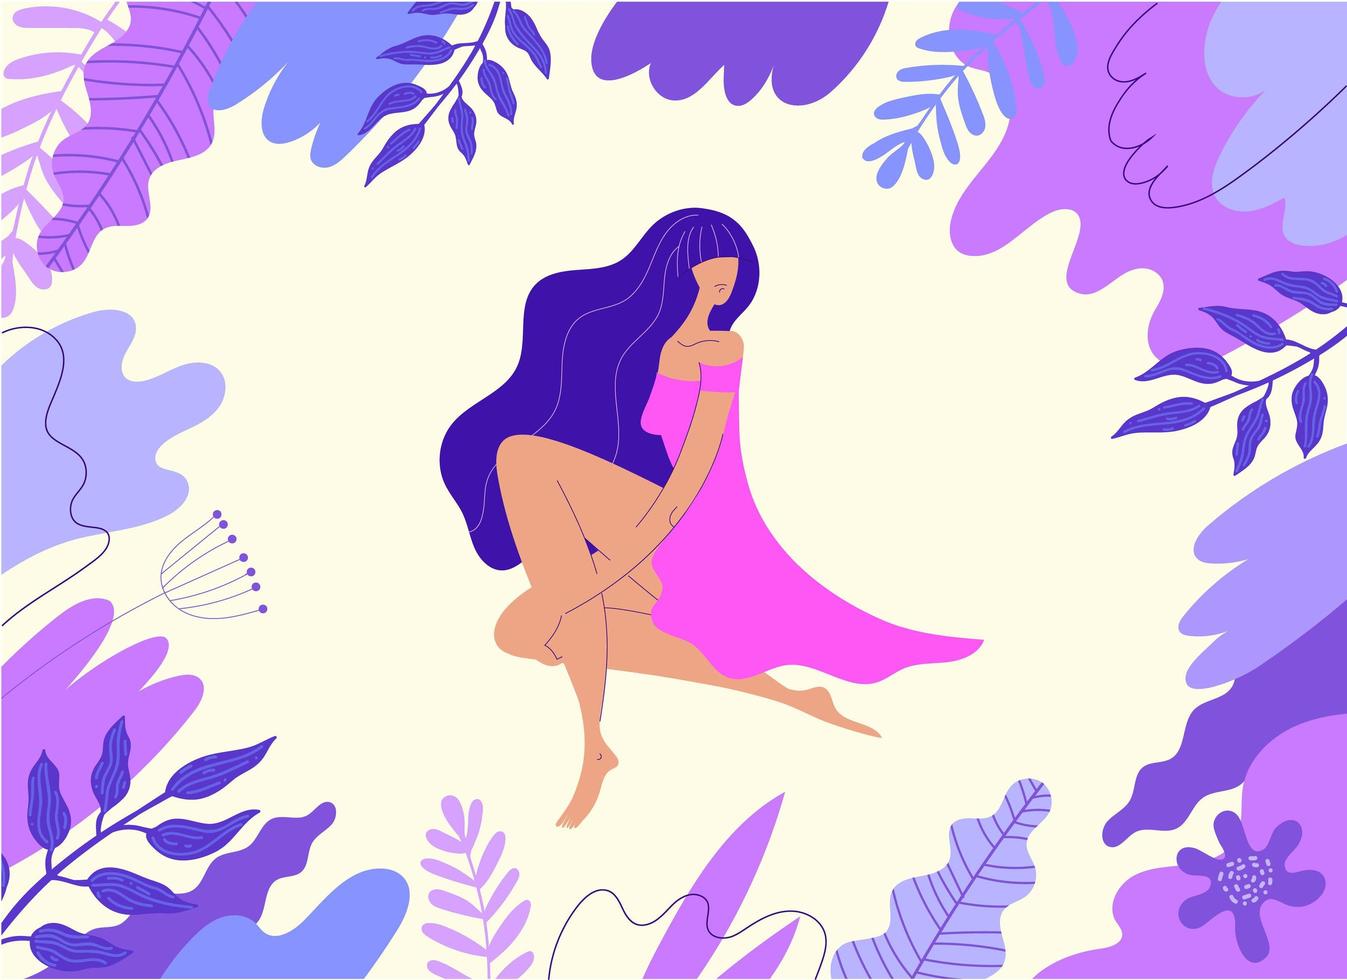 Vector illustration. Woman sitting with leaves, florals, wavy elements around. Web page design templates for beauty, spa, wellness, natural products, cosmetics, body care. Modern concept